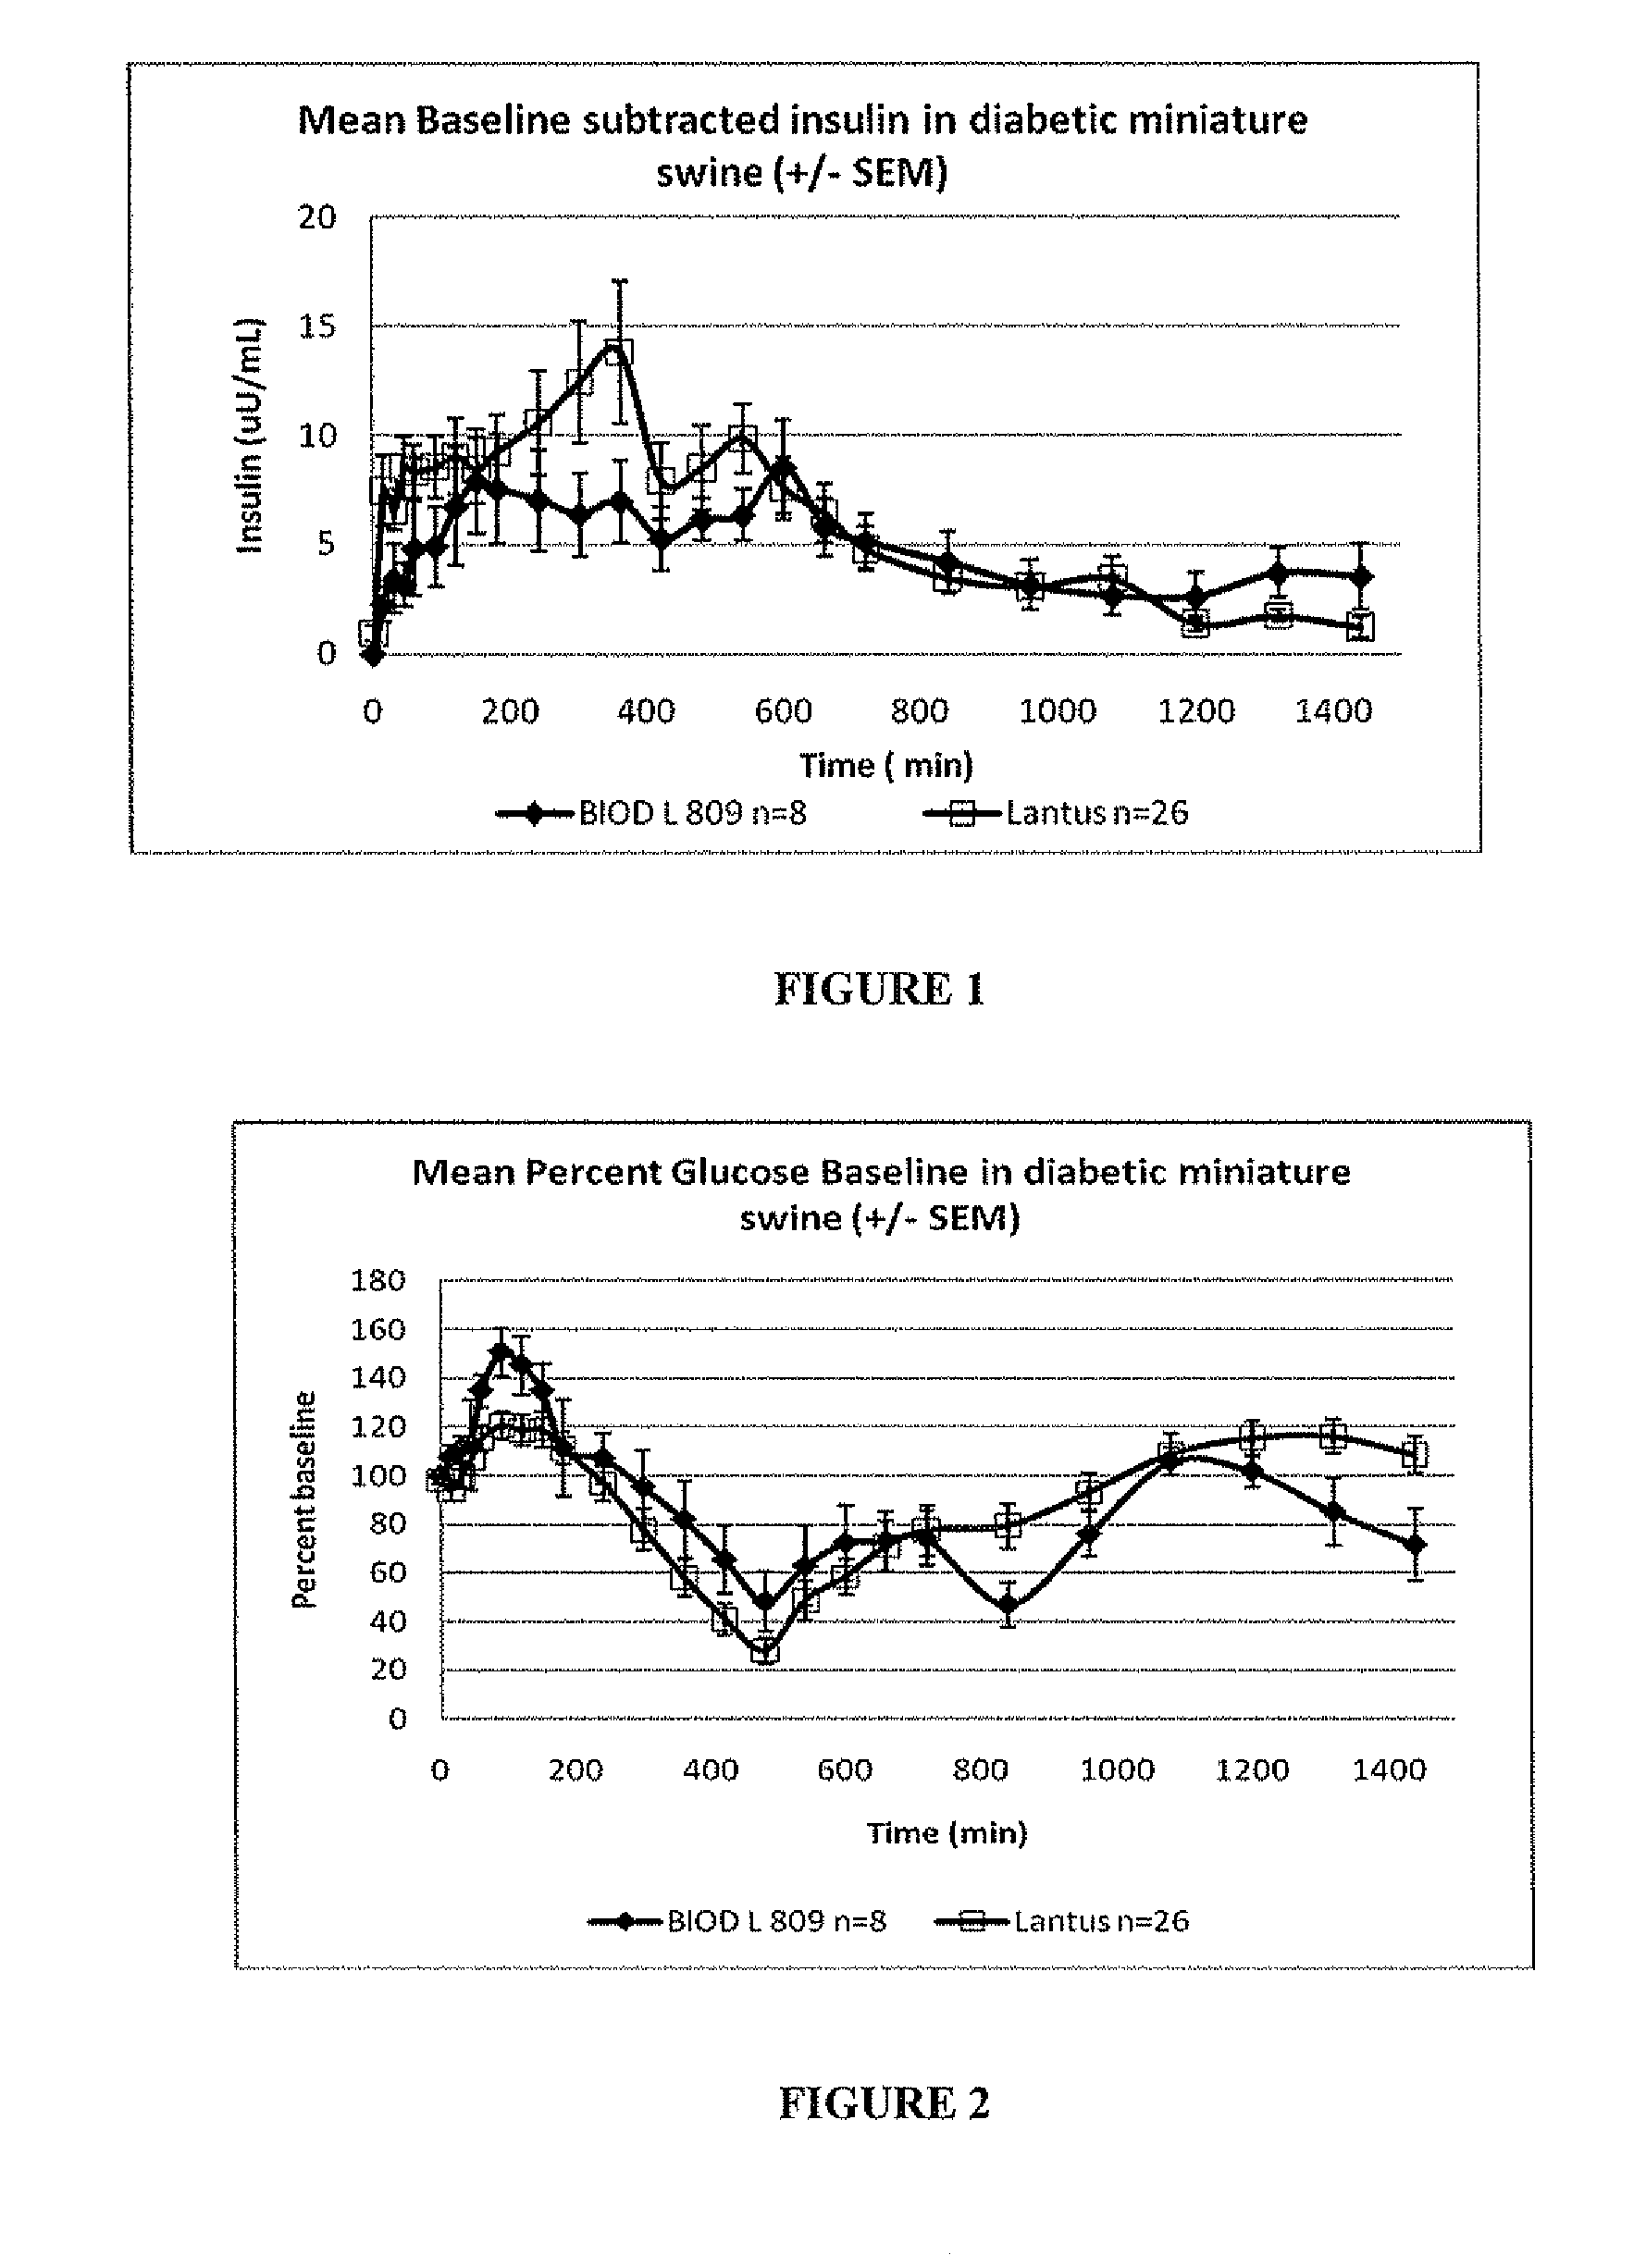 Insulin with a stable basal release profile